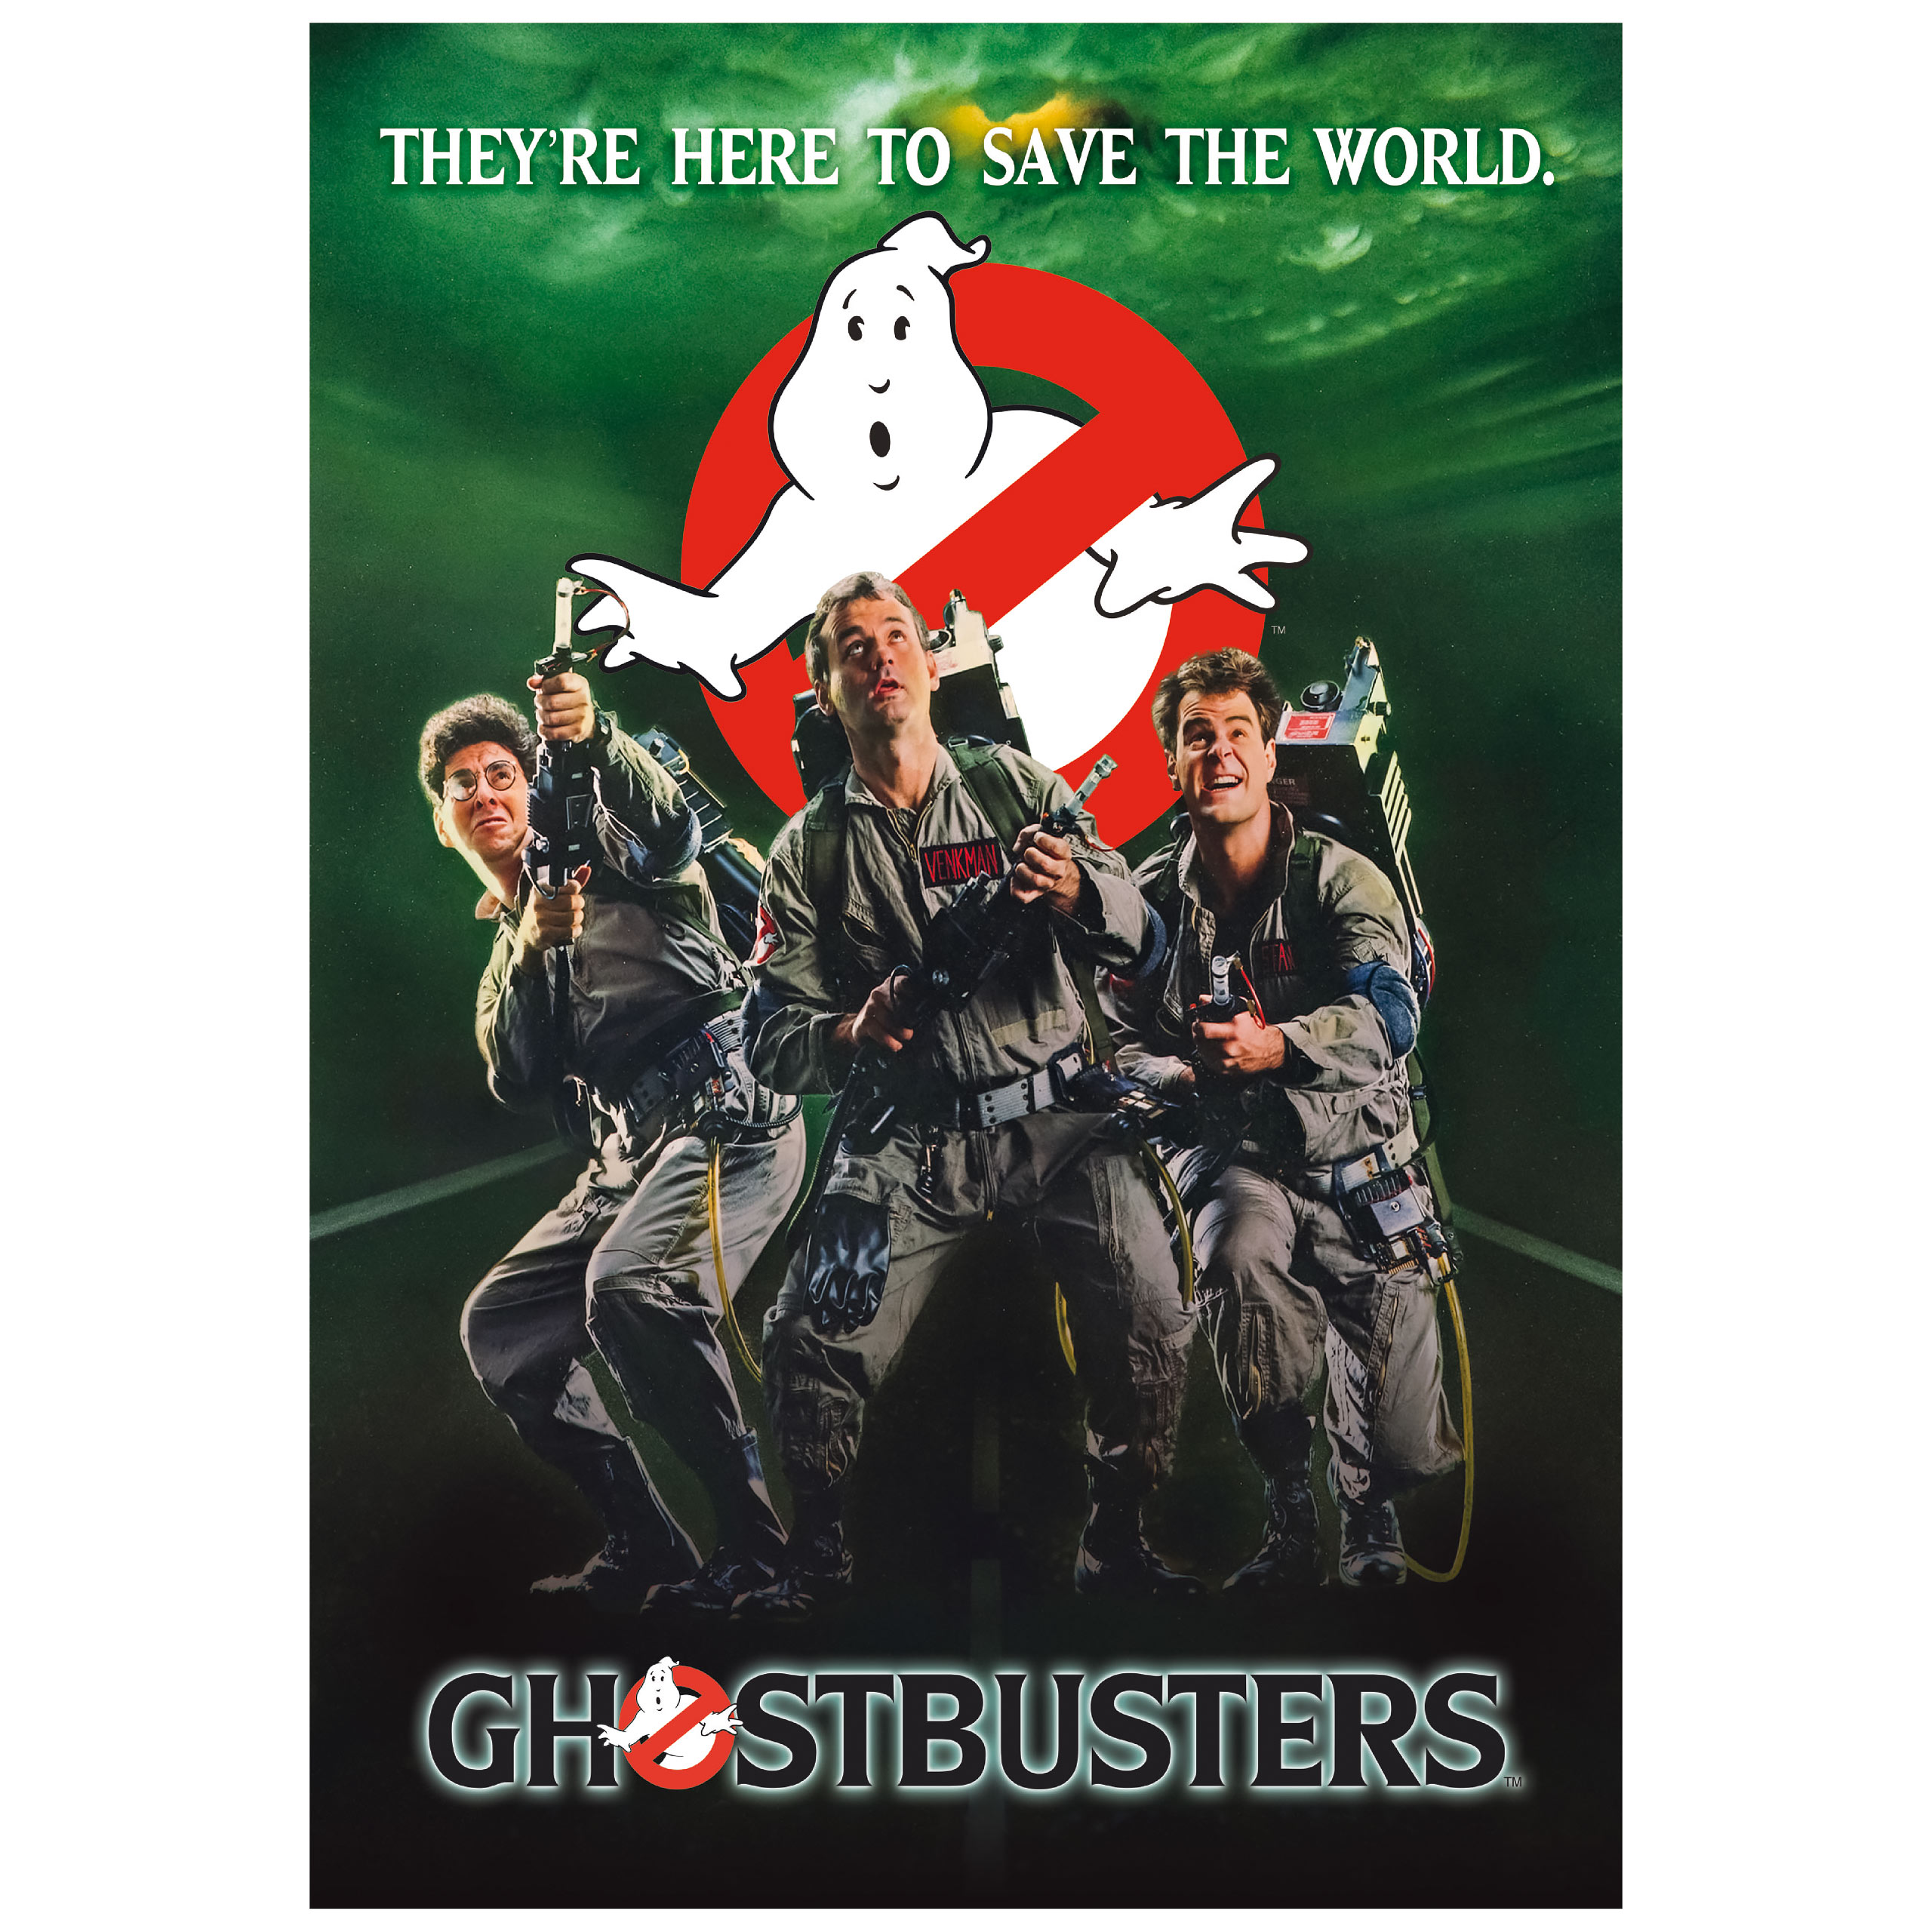 Ghostbusters - Save The World Puzzle